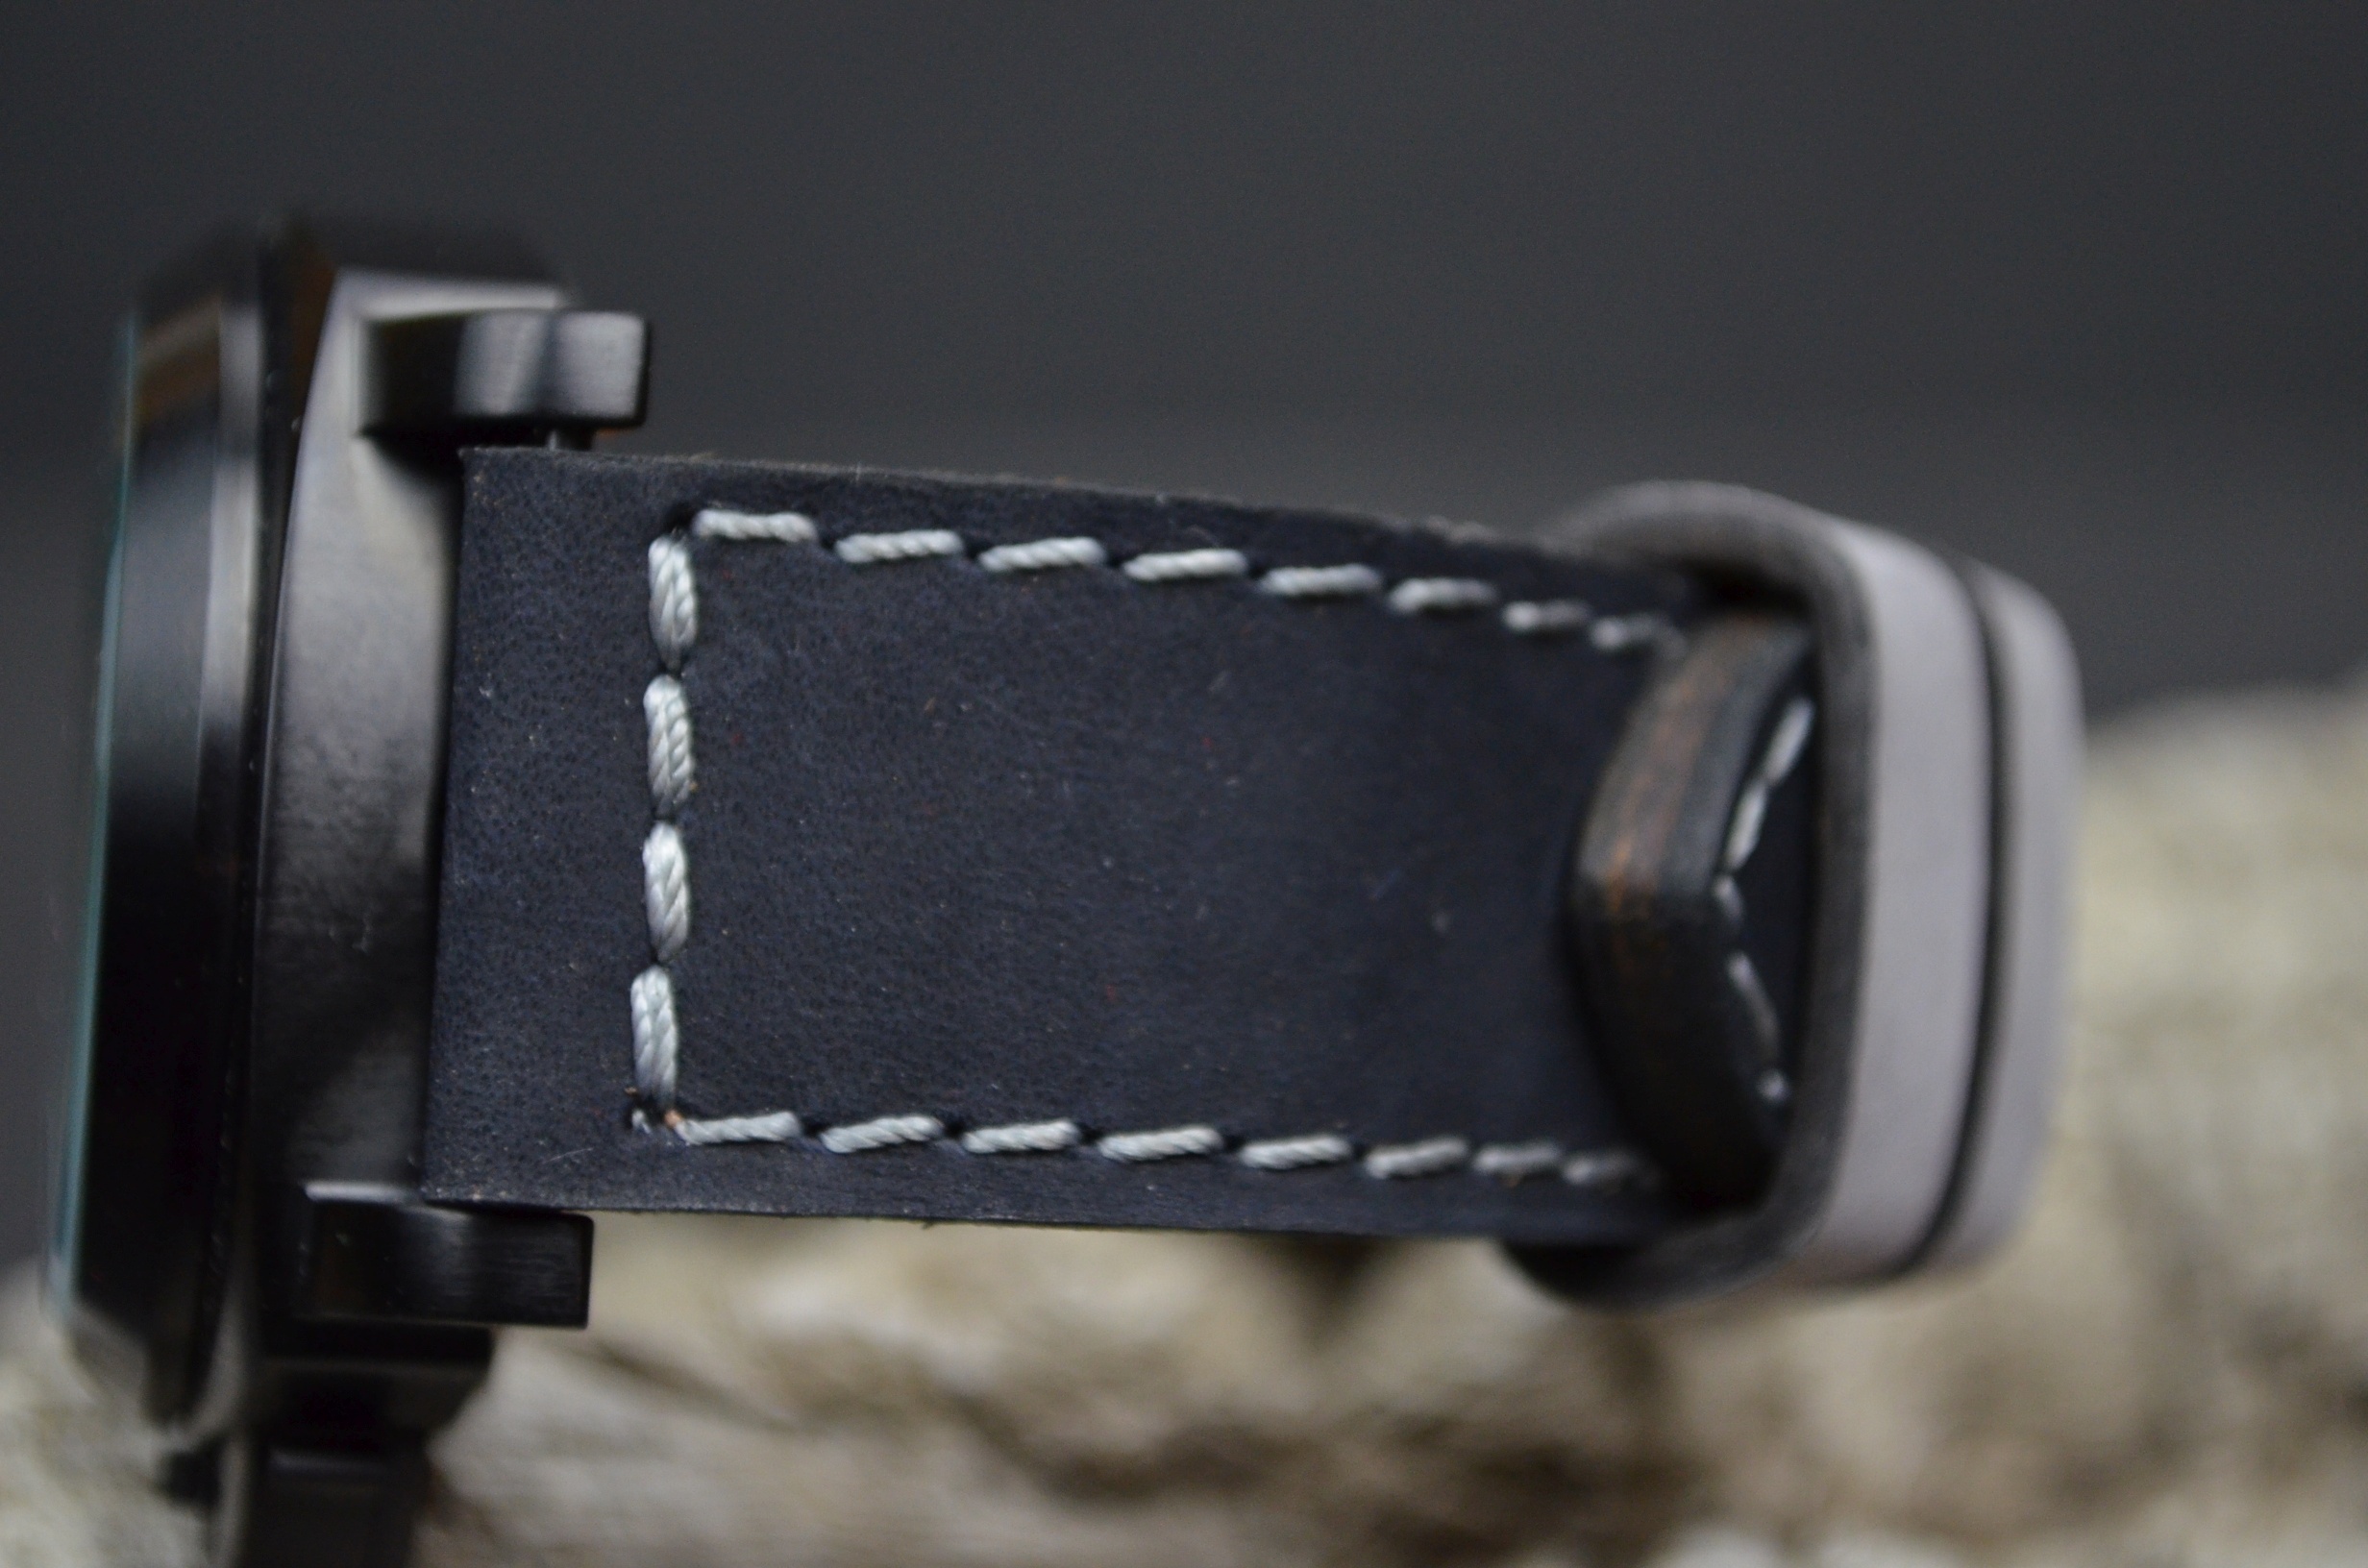 BLACK GREY is one of our hand crafted watch straps. Available in black grey color, 3.5 - 4 mm thick.